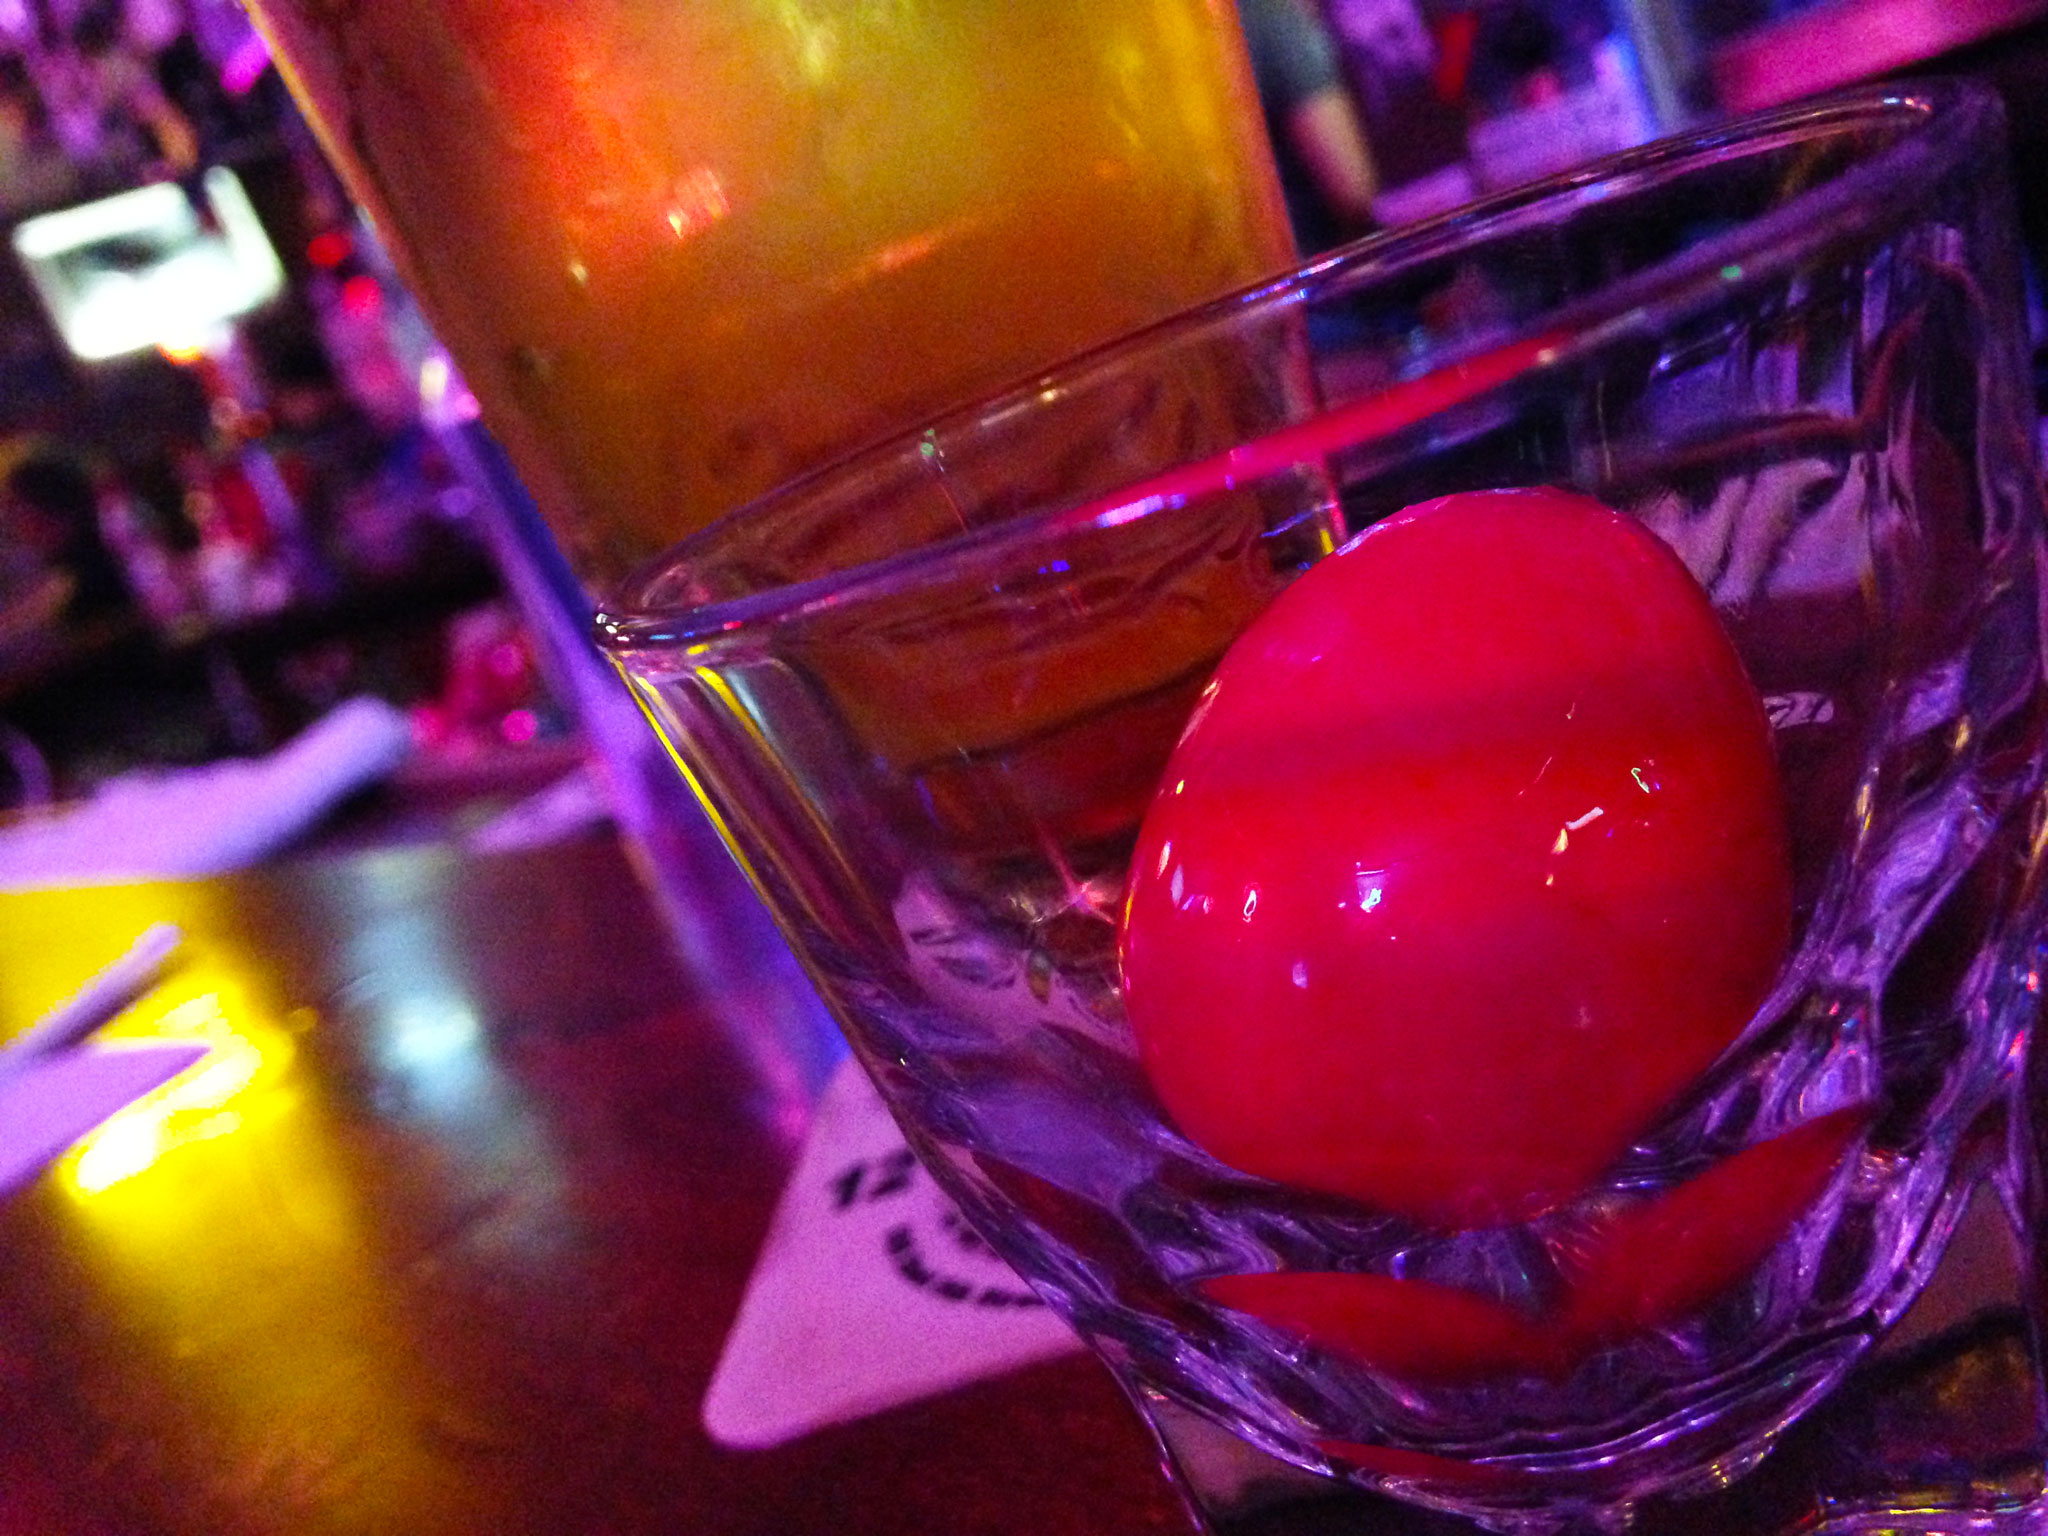 Pickled Egg at The Buffet